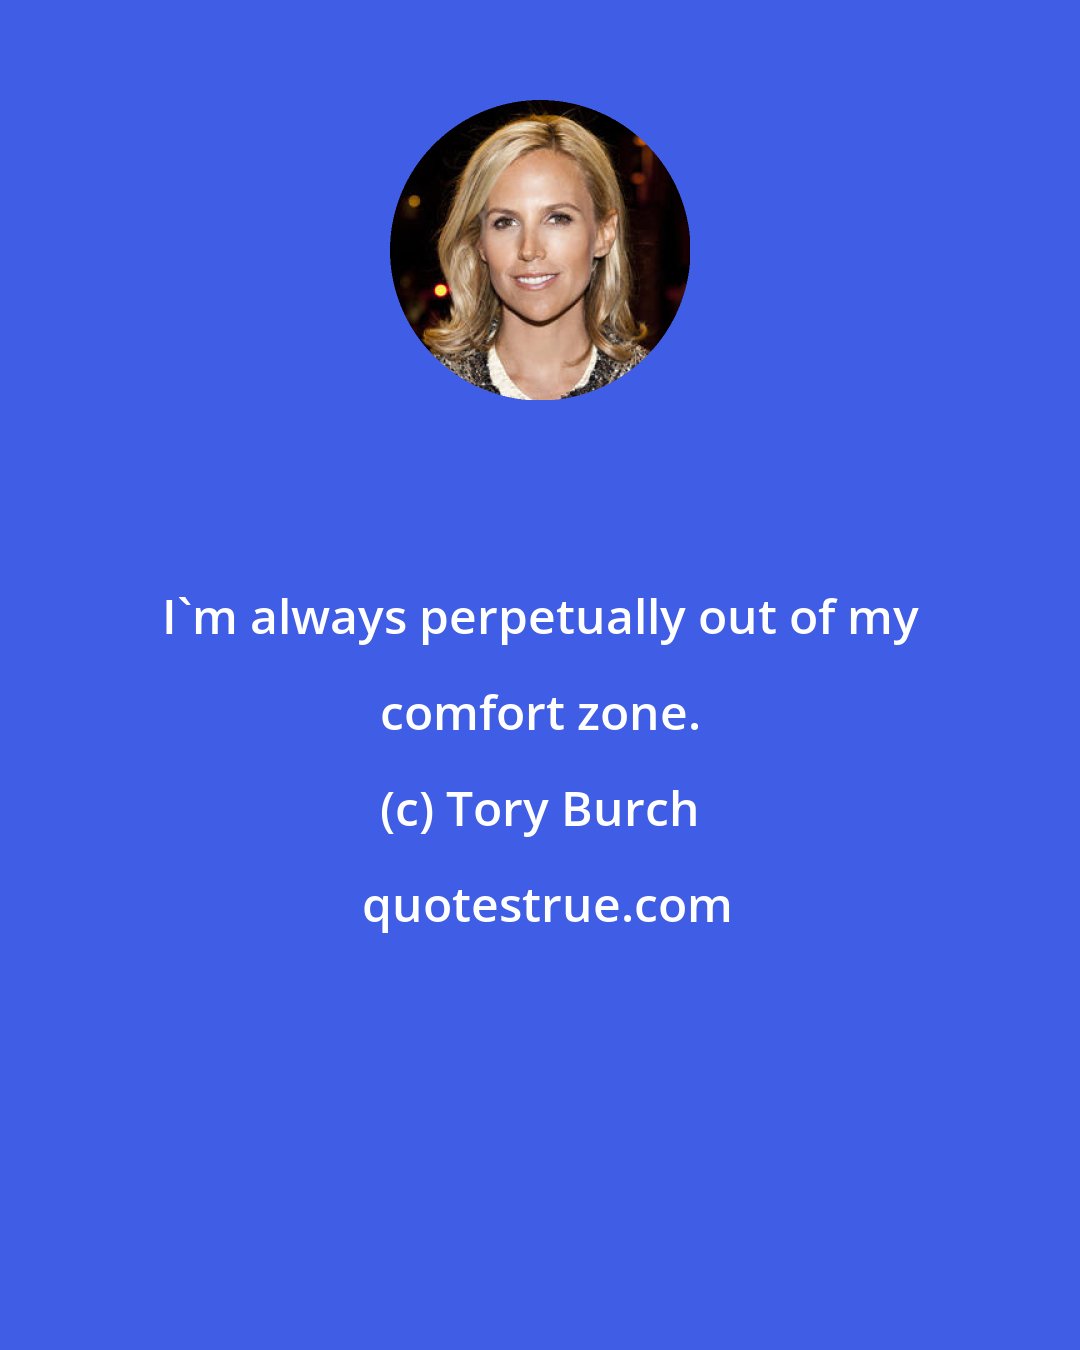 Tory Burch: I'm always perpetually out of my comfort zone.